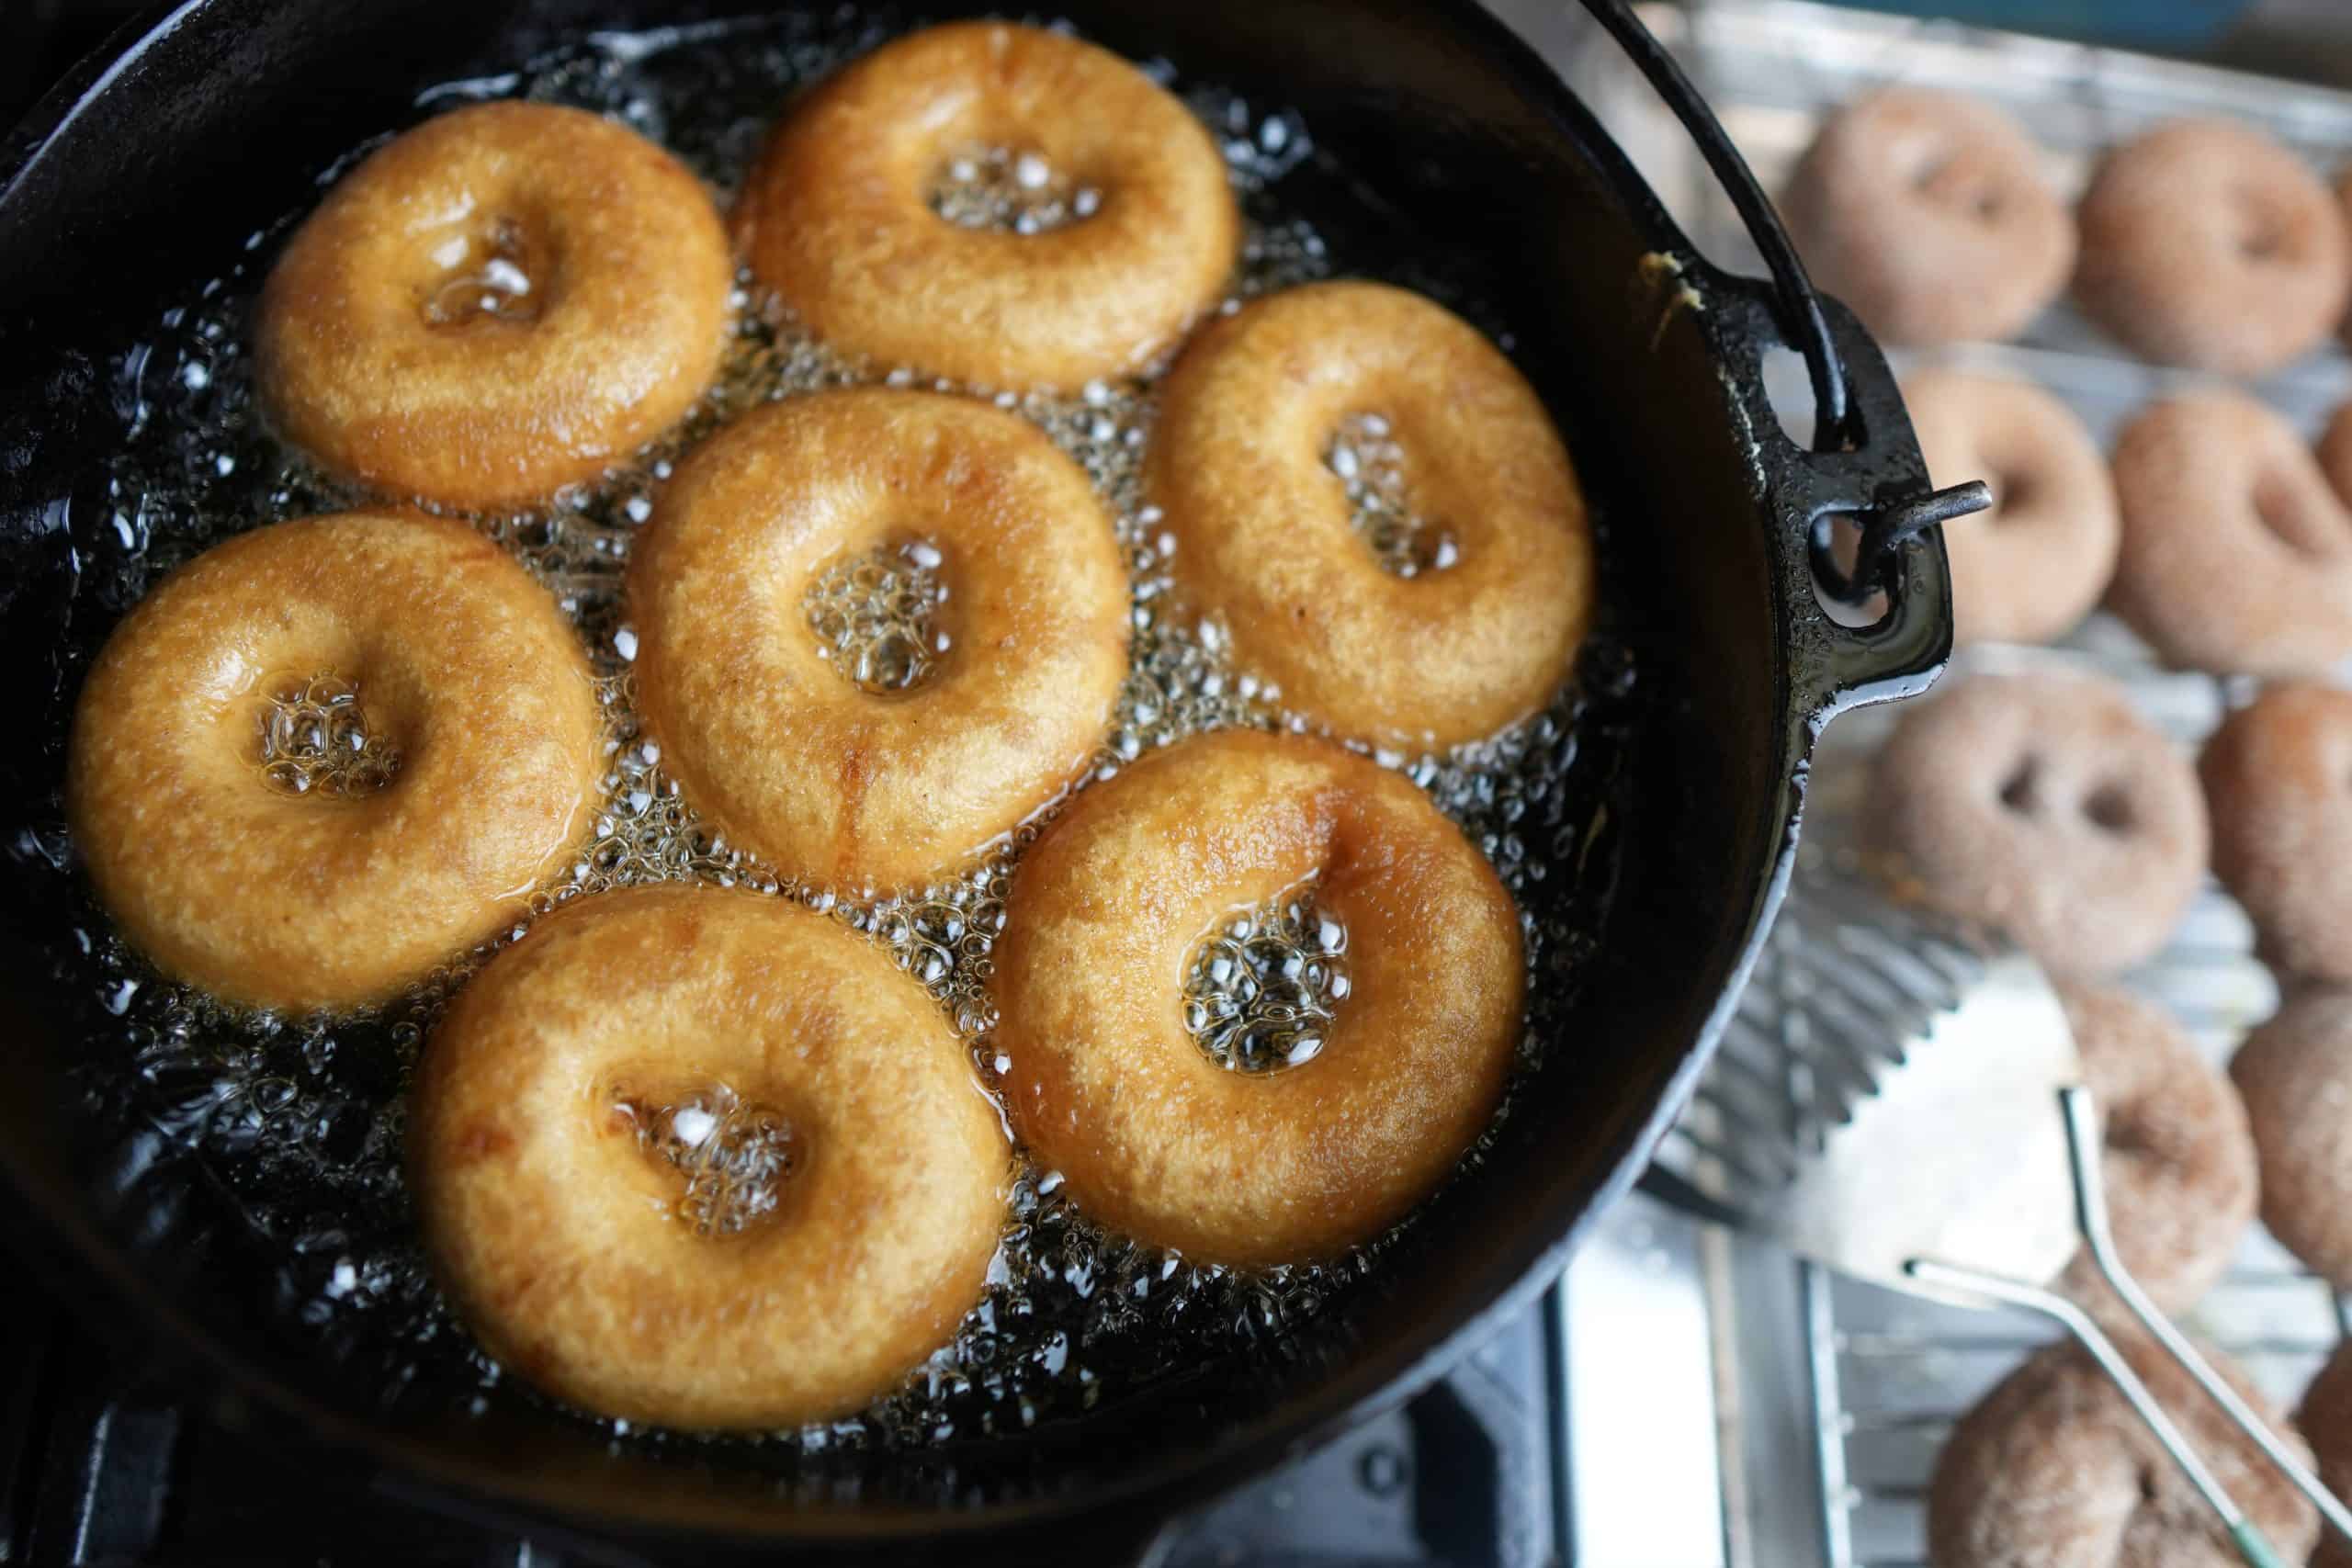 Vegan apple cider donuts are being cooked in a cast iron skillet.